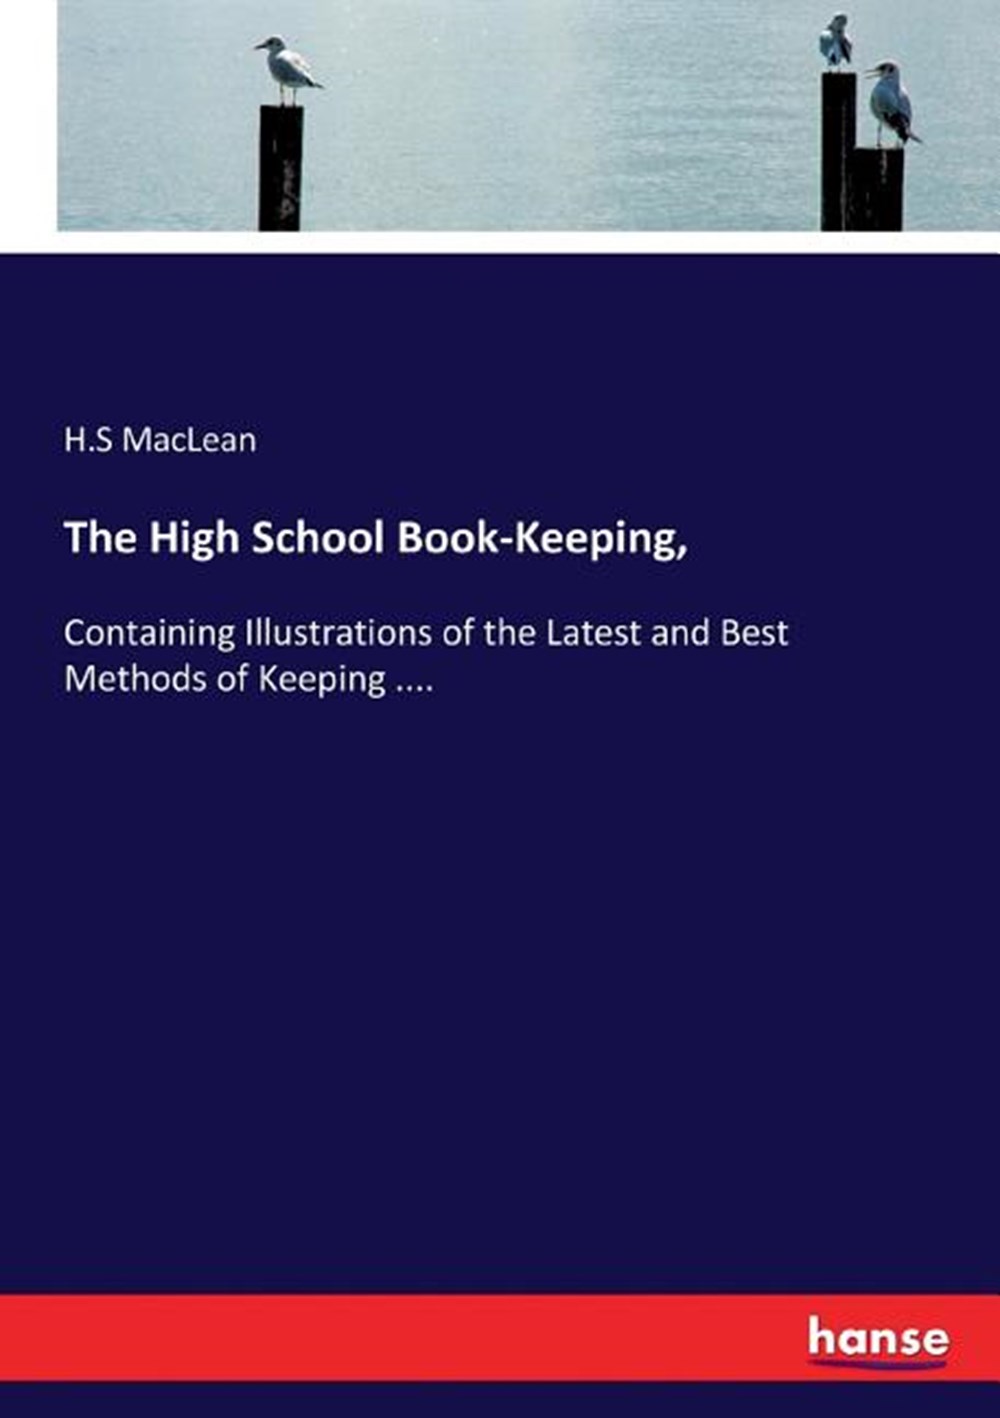 High School Book-Keeping, Containing Illustrations of the Latest and Best Methods of Keeping ....